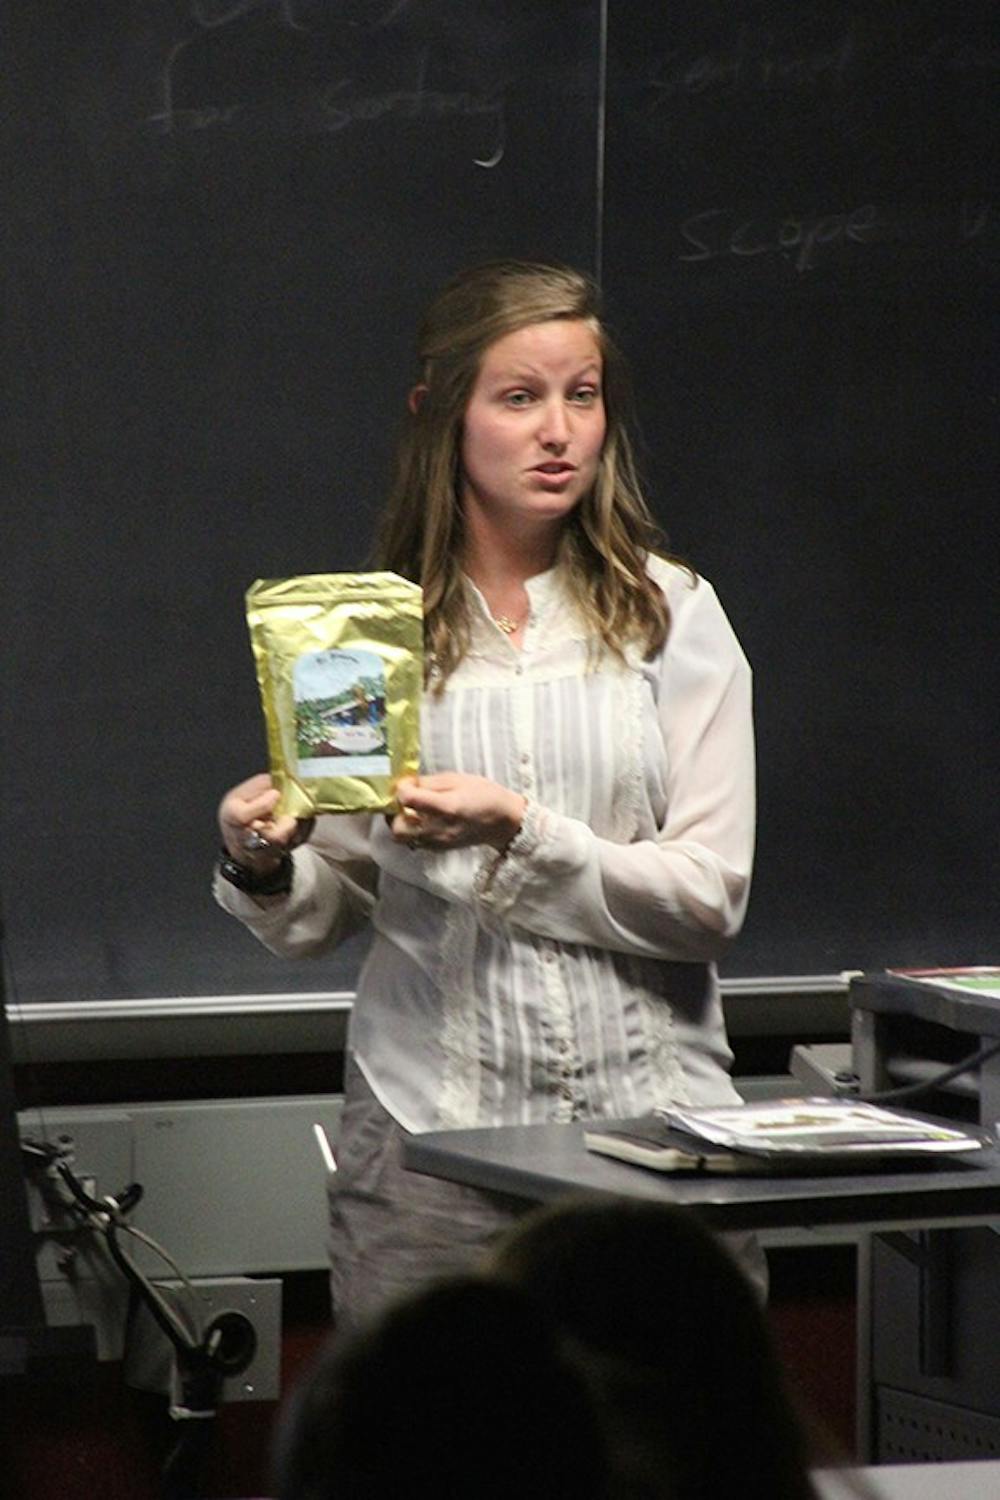 Student uncovers truth about Fair Trade coffee